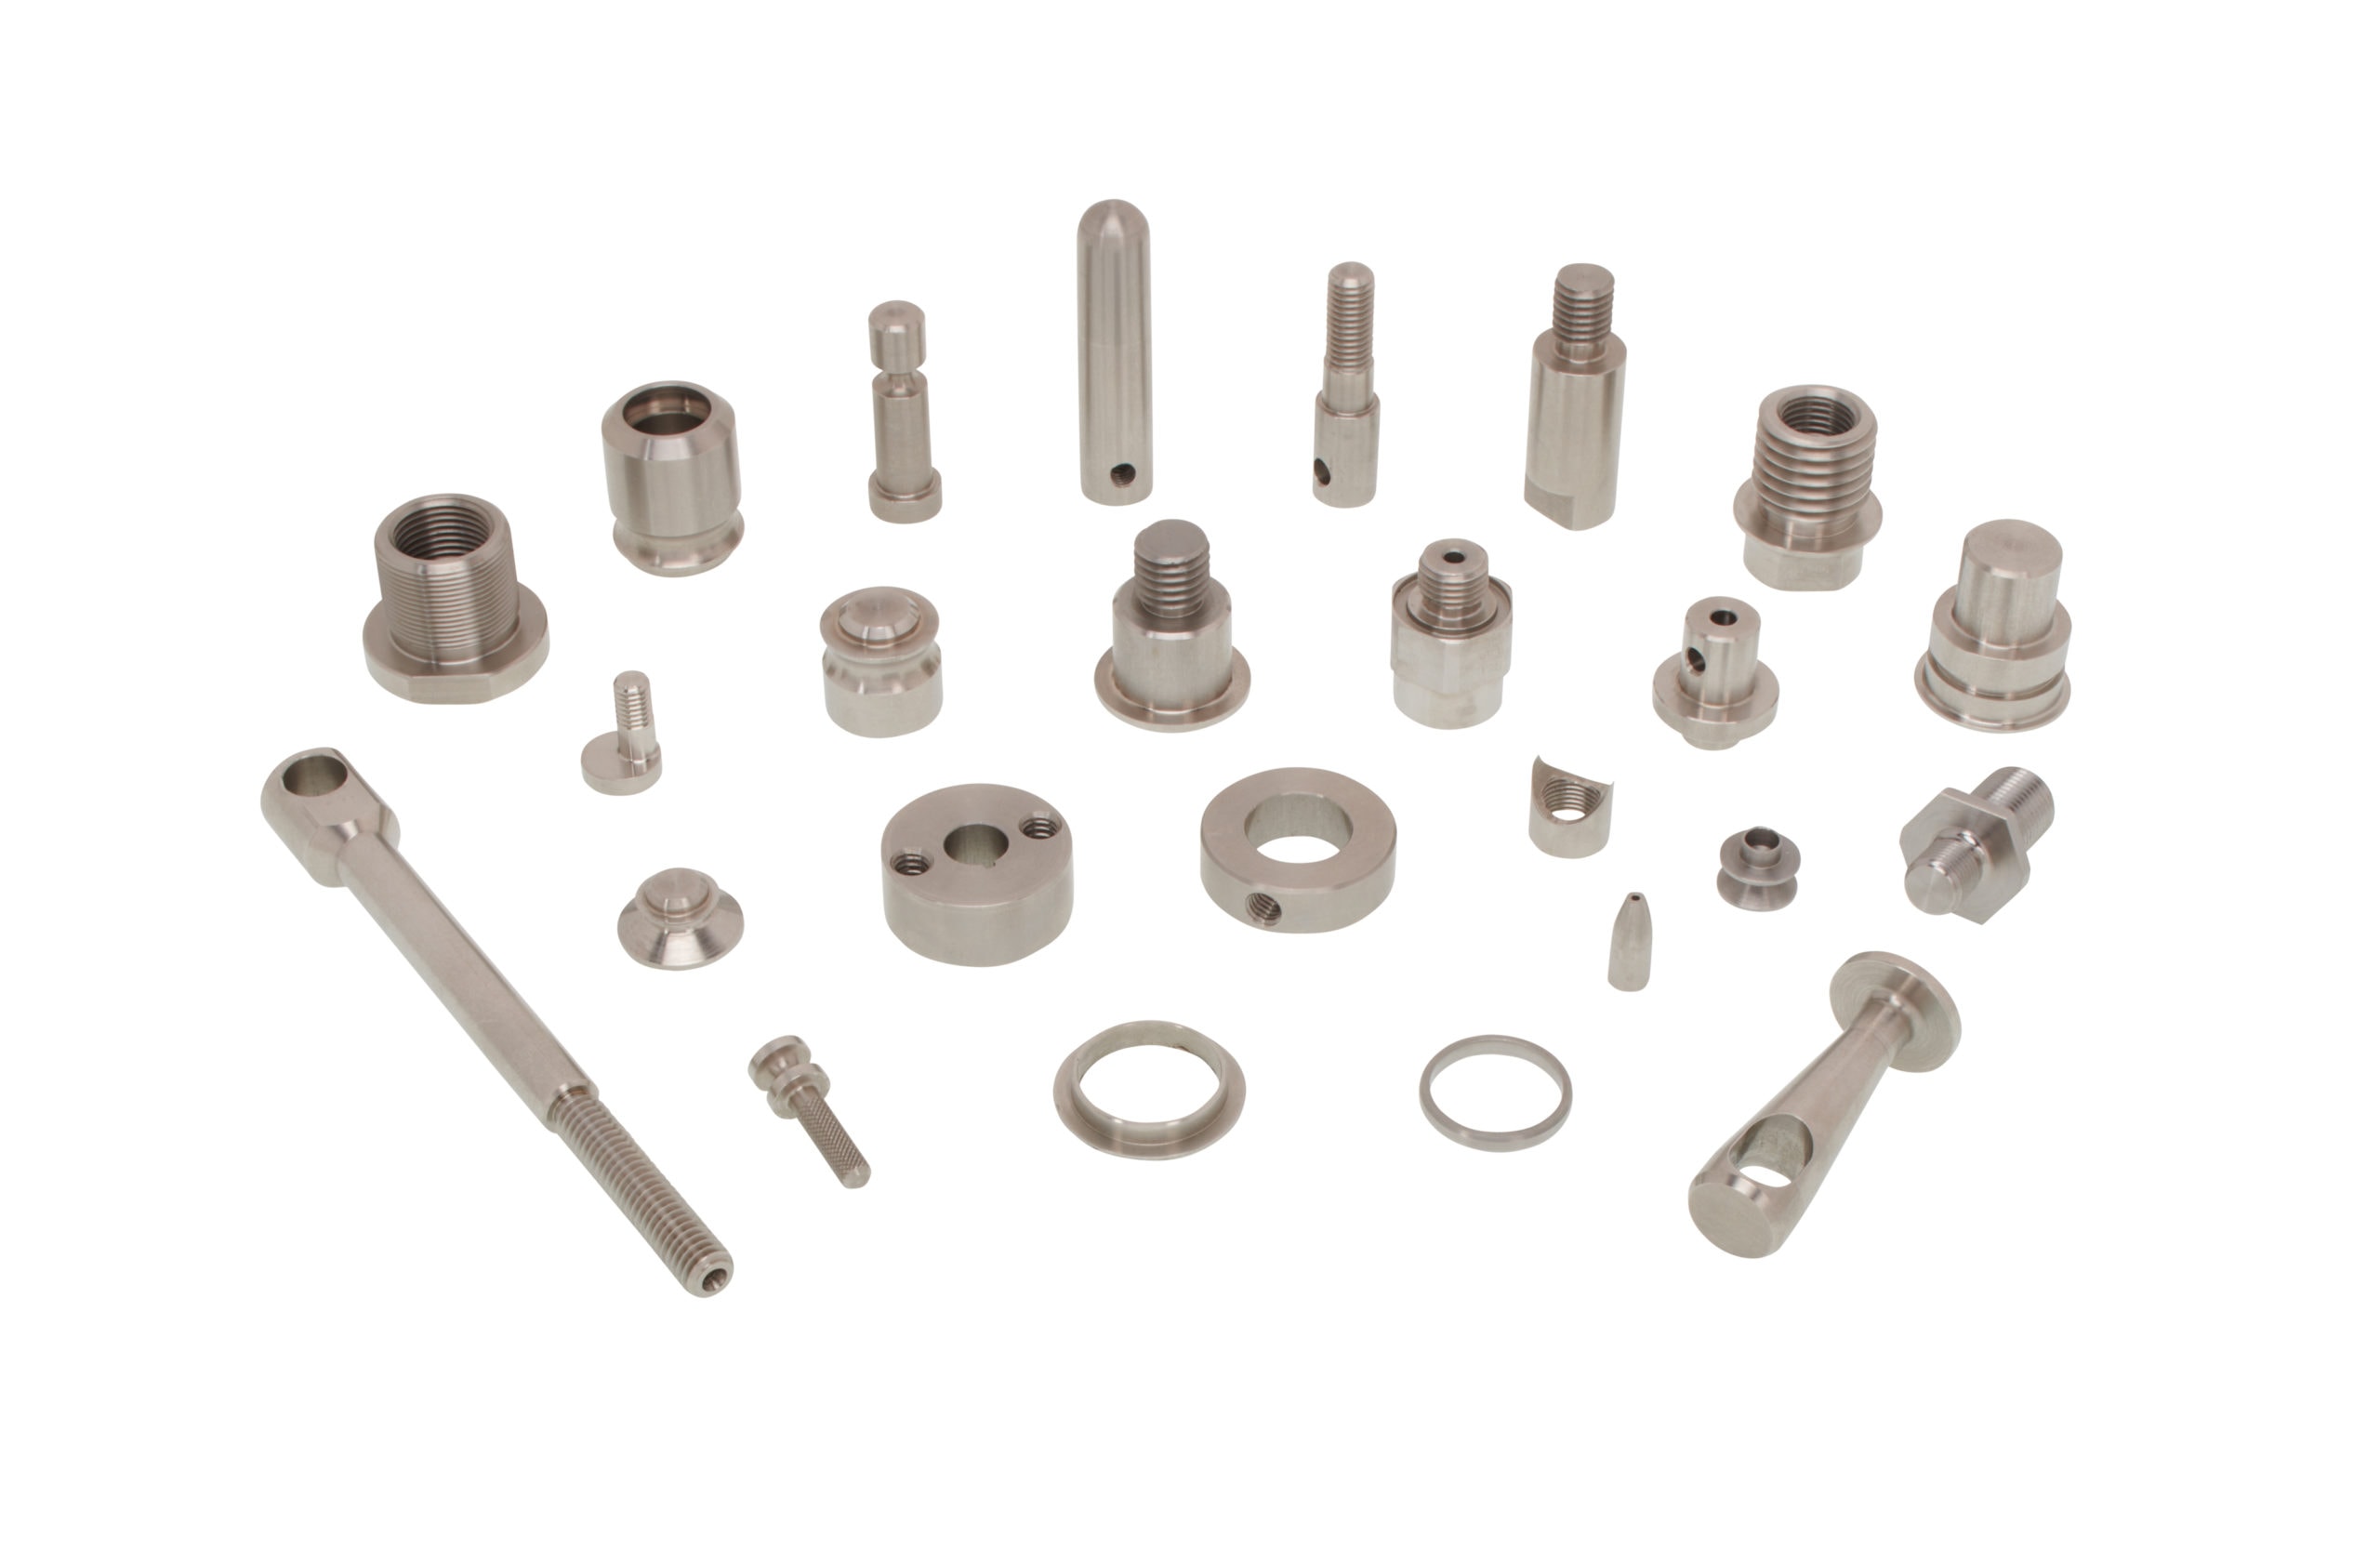 Variety of CNC Turned Parts 2 - CNC Turning Services